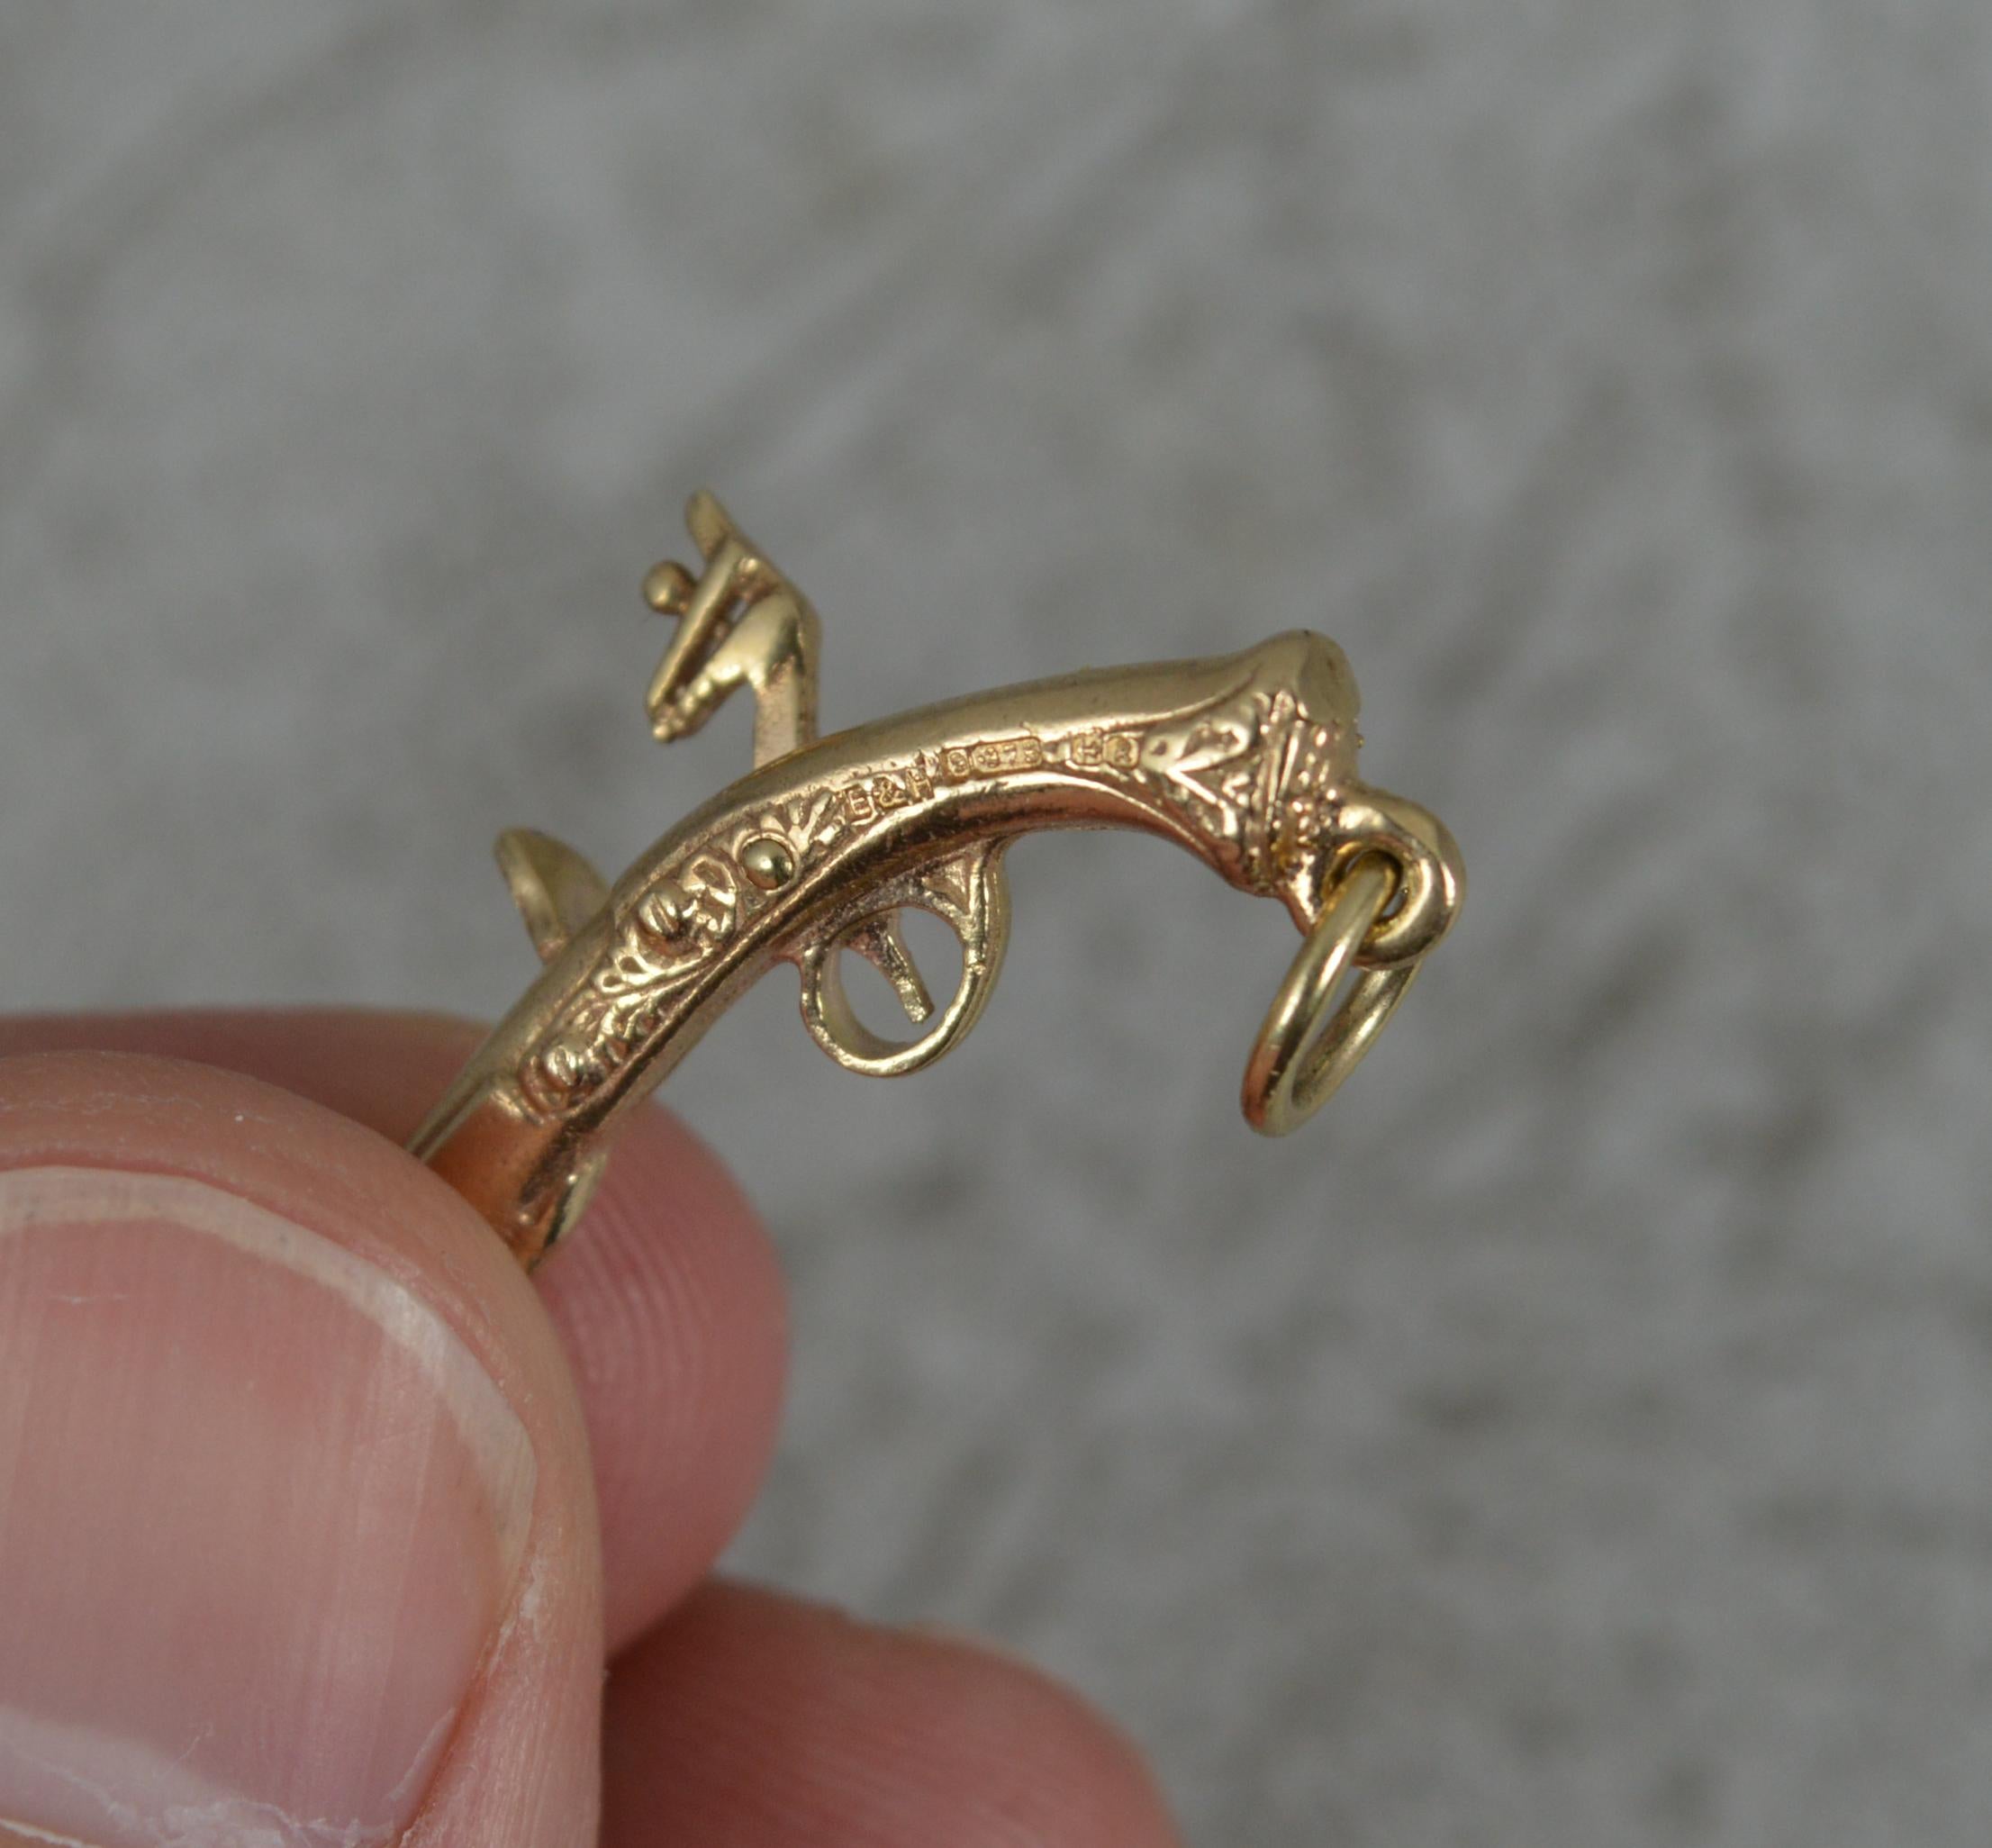 Rare Solid 9 Carat Yellow Gold Vintage Pistol Gun Pendant or Charm In Excellent Condition For Sale In St Helens, GB